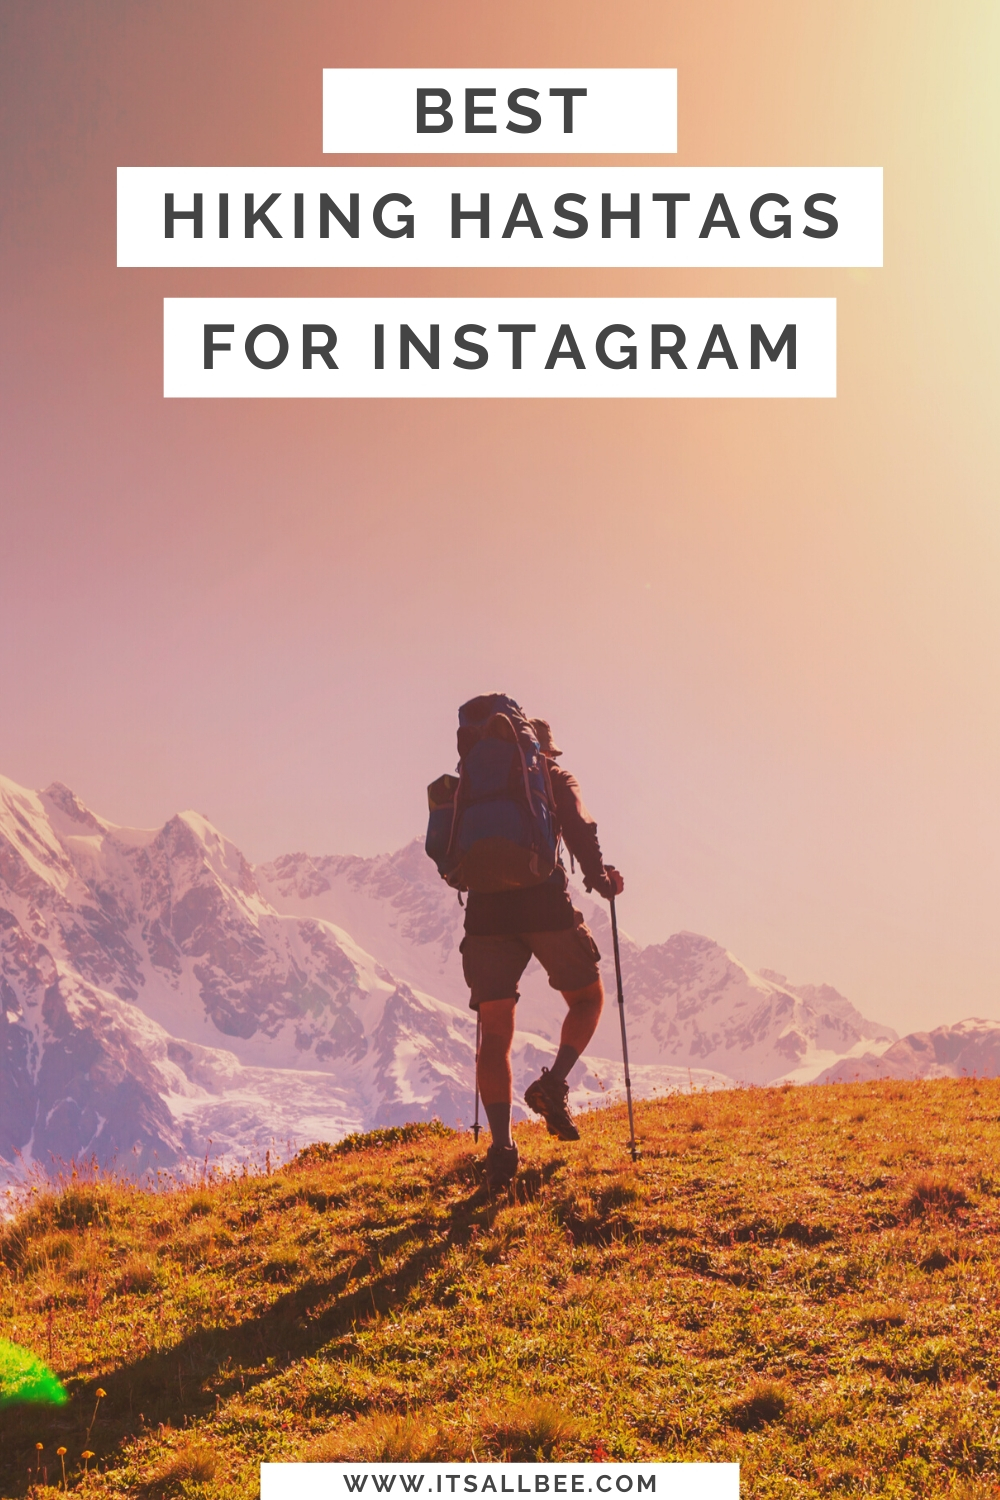 The Best Hiking Hashtags For Instagram Perfect For Outdoors & Nature